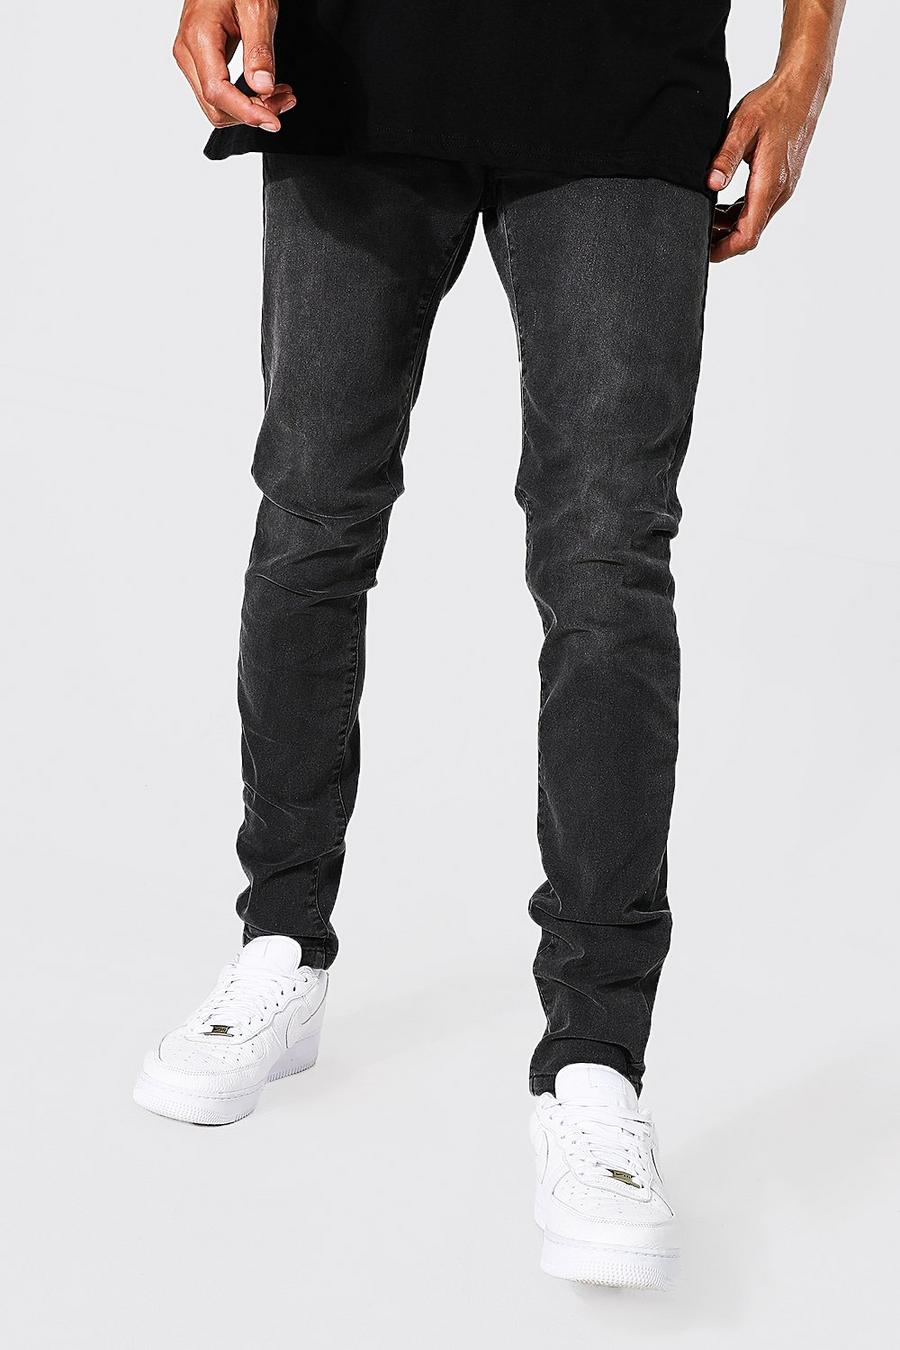 Charcoal gris Tall Skinny Stretch Jean image number 1